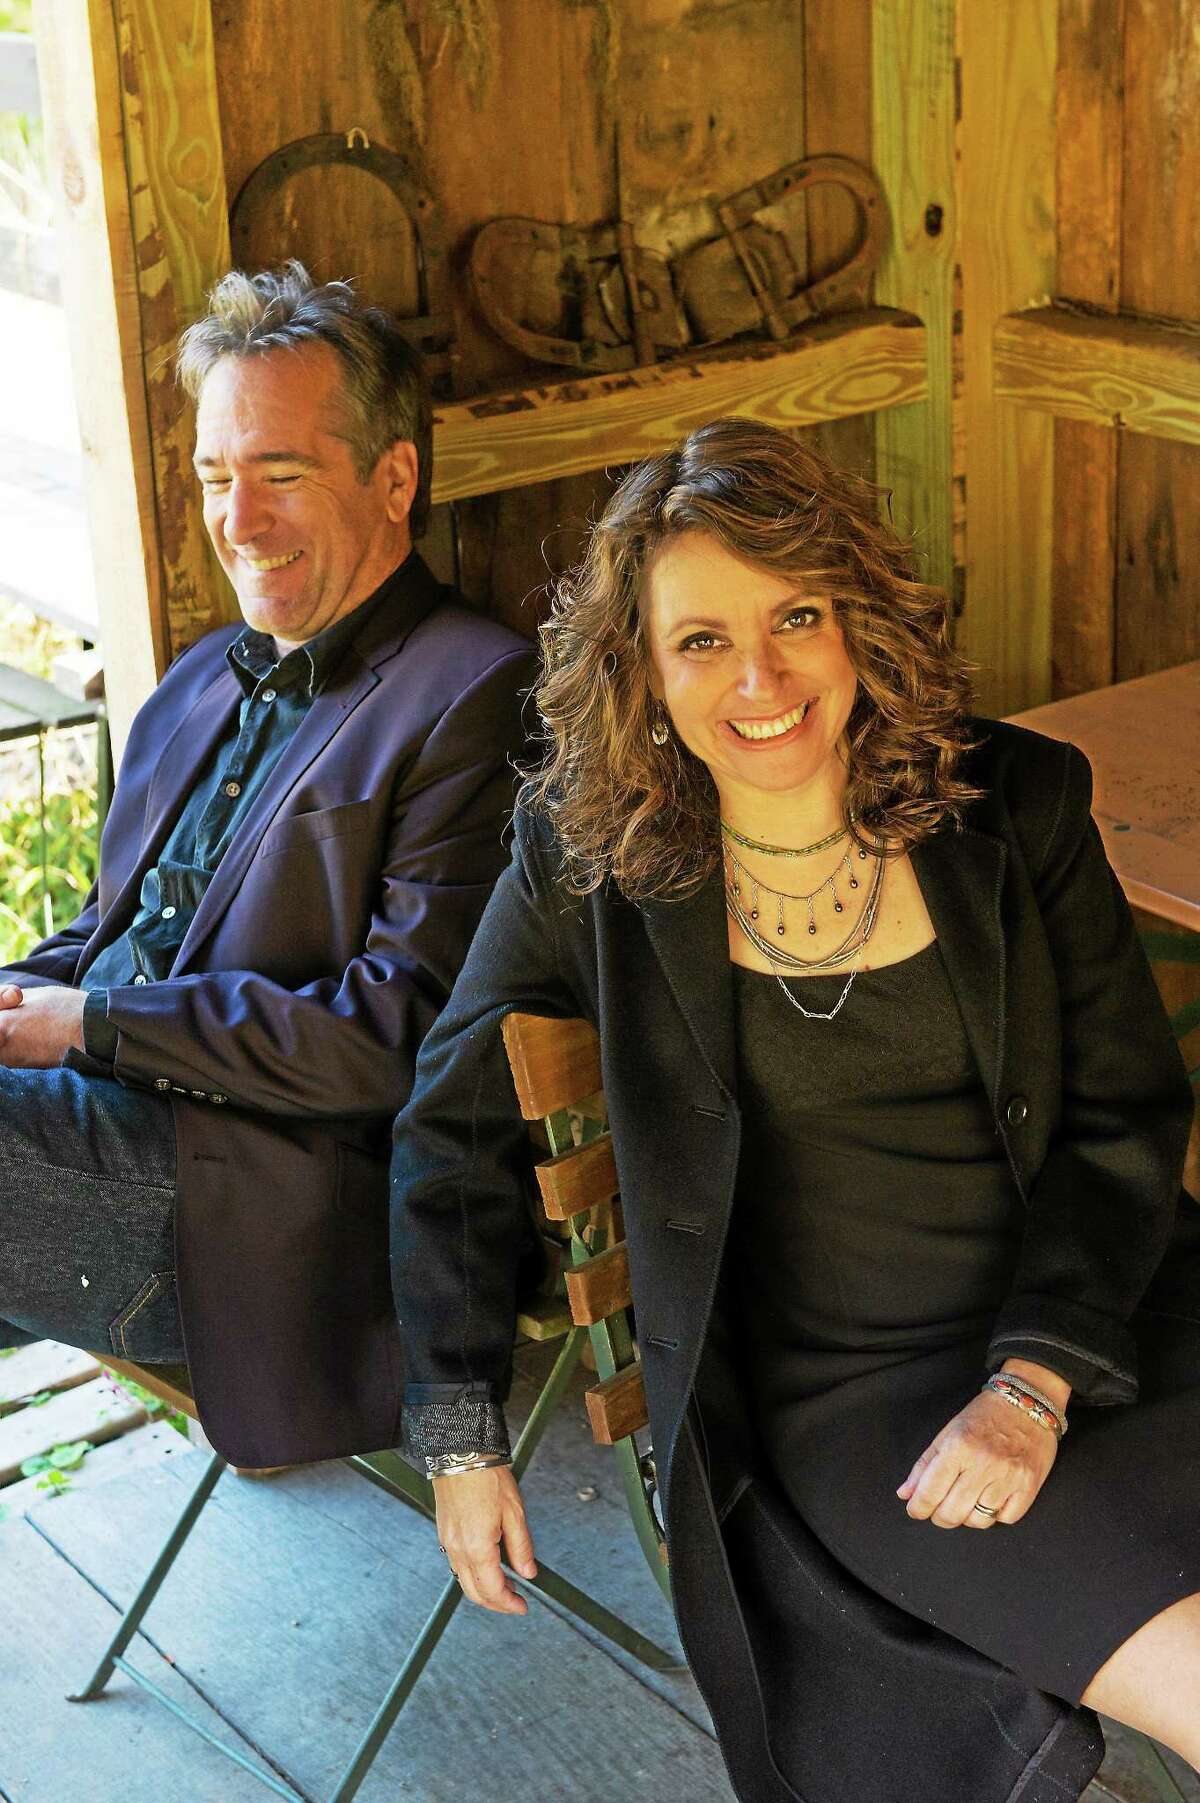 Longtime collaborators Lucy Kaplansky and Richard Shindell are touring behind their “Tomorrow You’re Going” album.